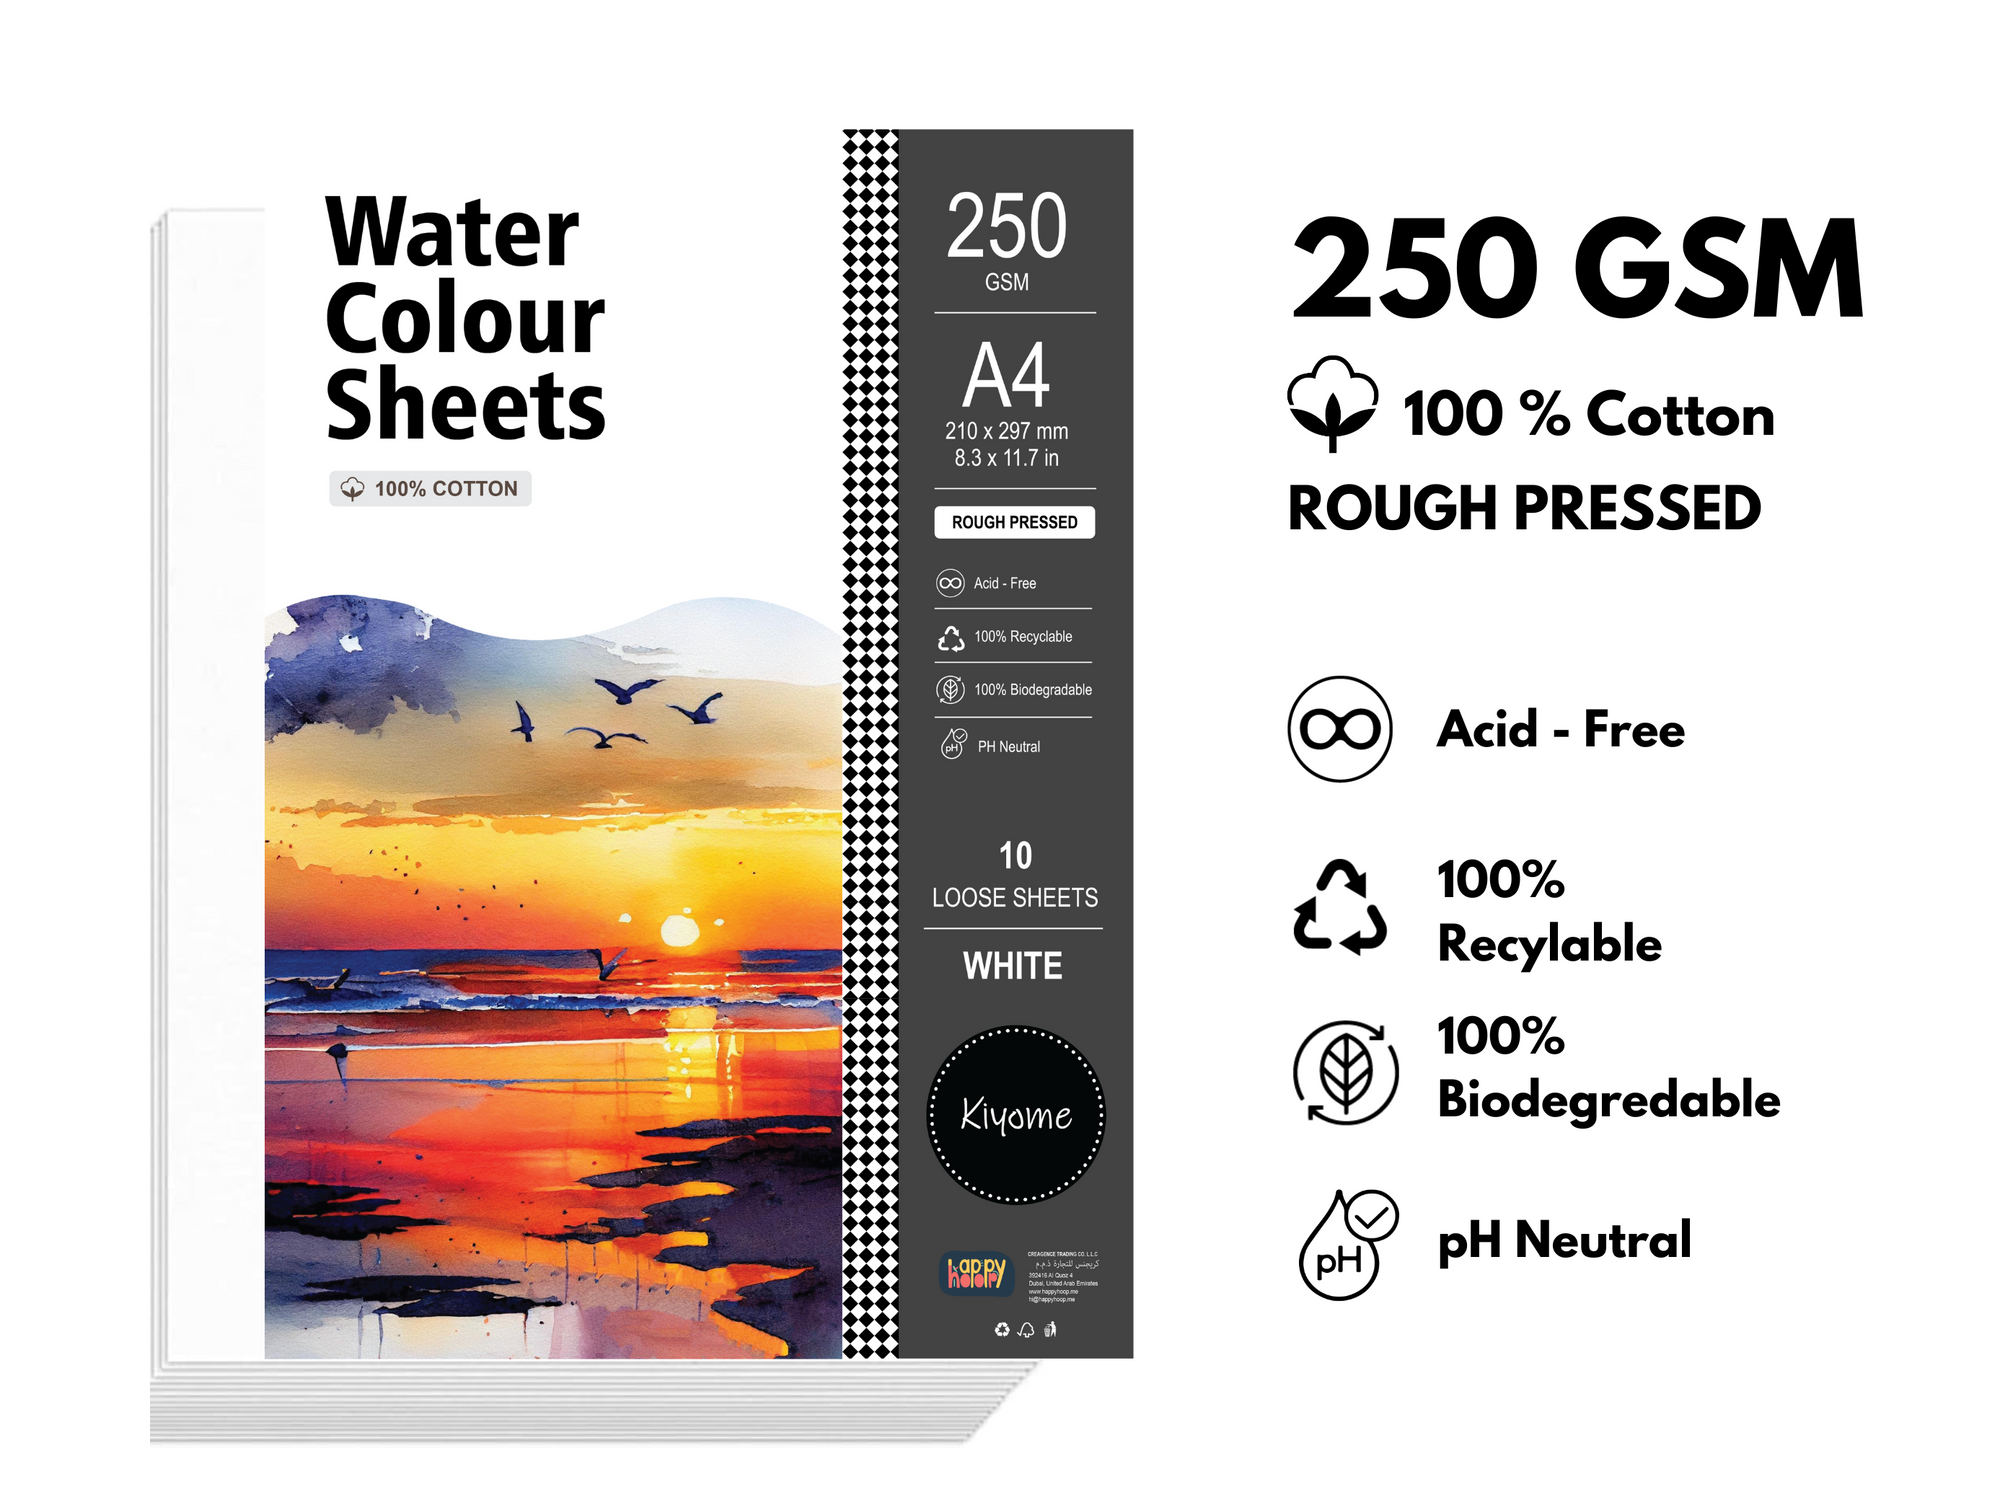 Kiyome 100% Cotton Watercolor Sheets | Rough Pressed | 250 GSM | A4 | 10 Sheets